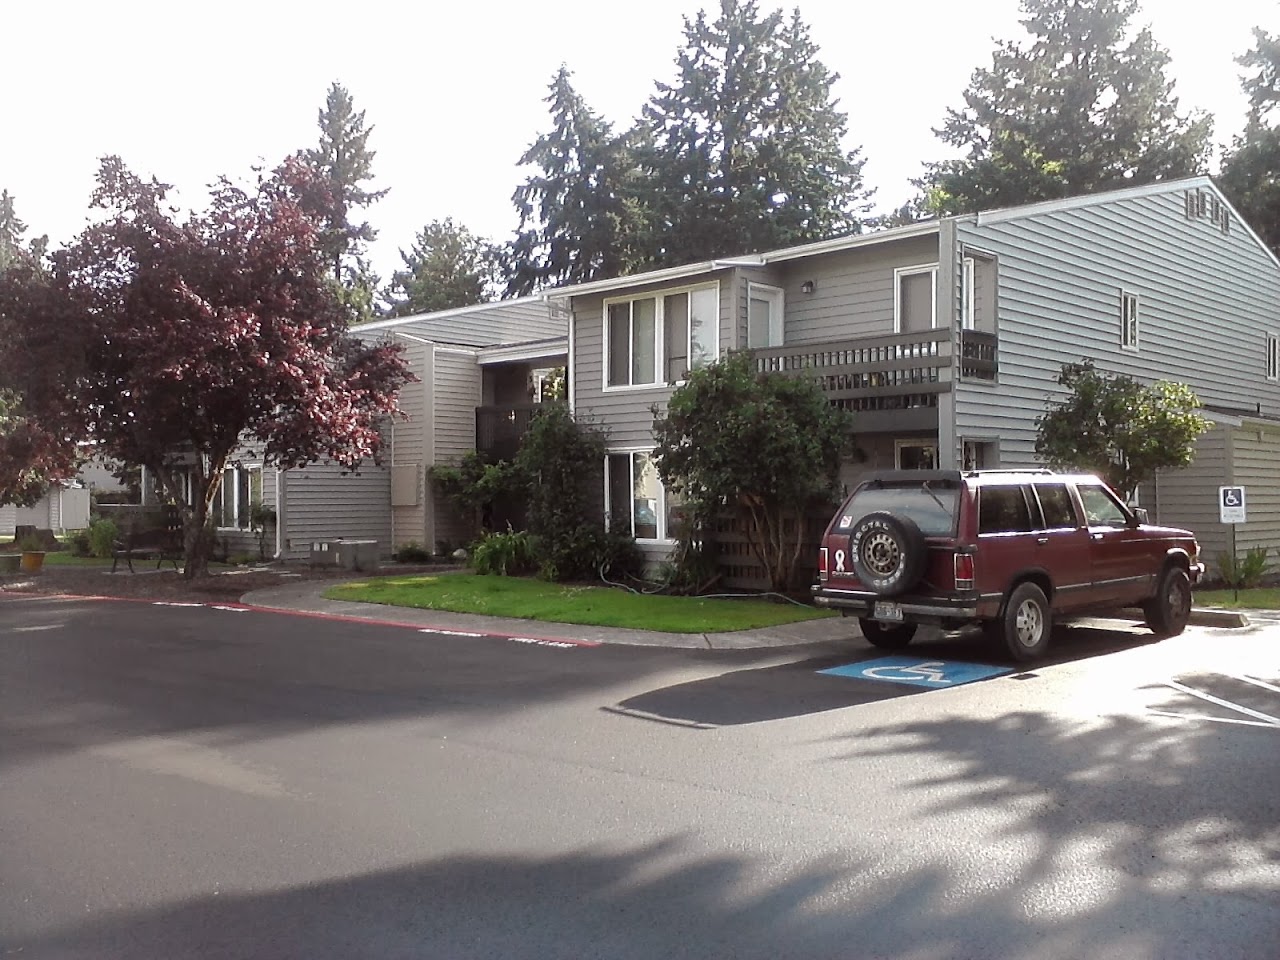 Photo of GARDEN COURT APARTMENTS. Affordable housing located at 61 GARDEN COURT RD PORT HADLOCK, WA 98339